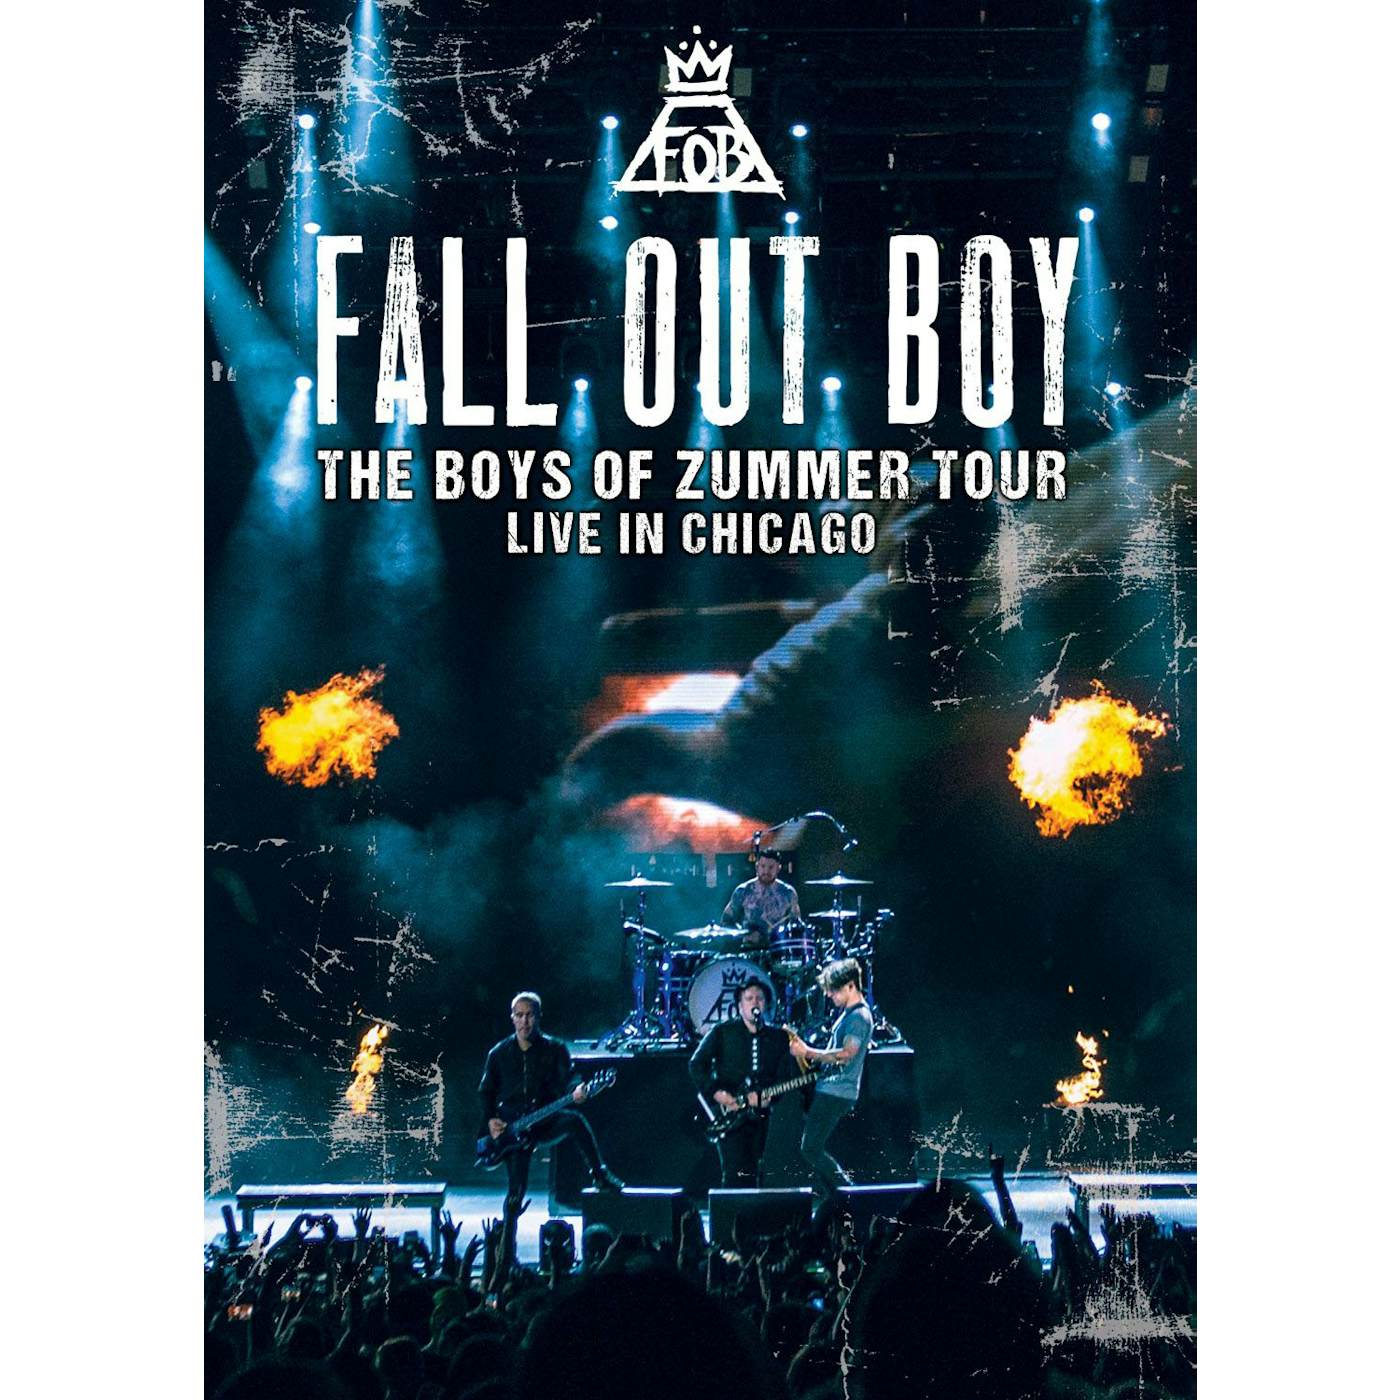 Fall Out Boy BOYS OF ZUMMER TOUR: LIVE IN CHICAGO DVD